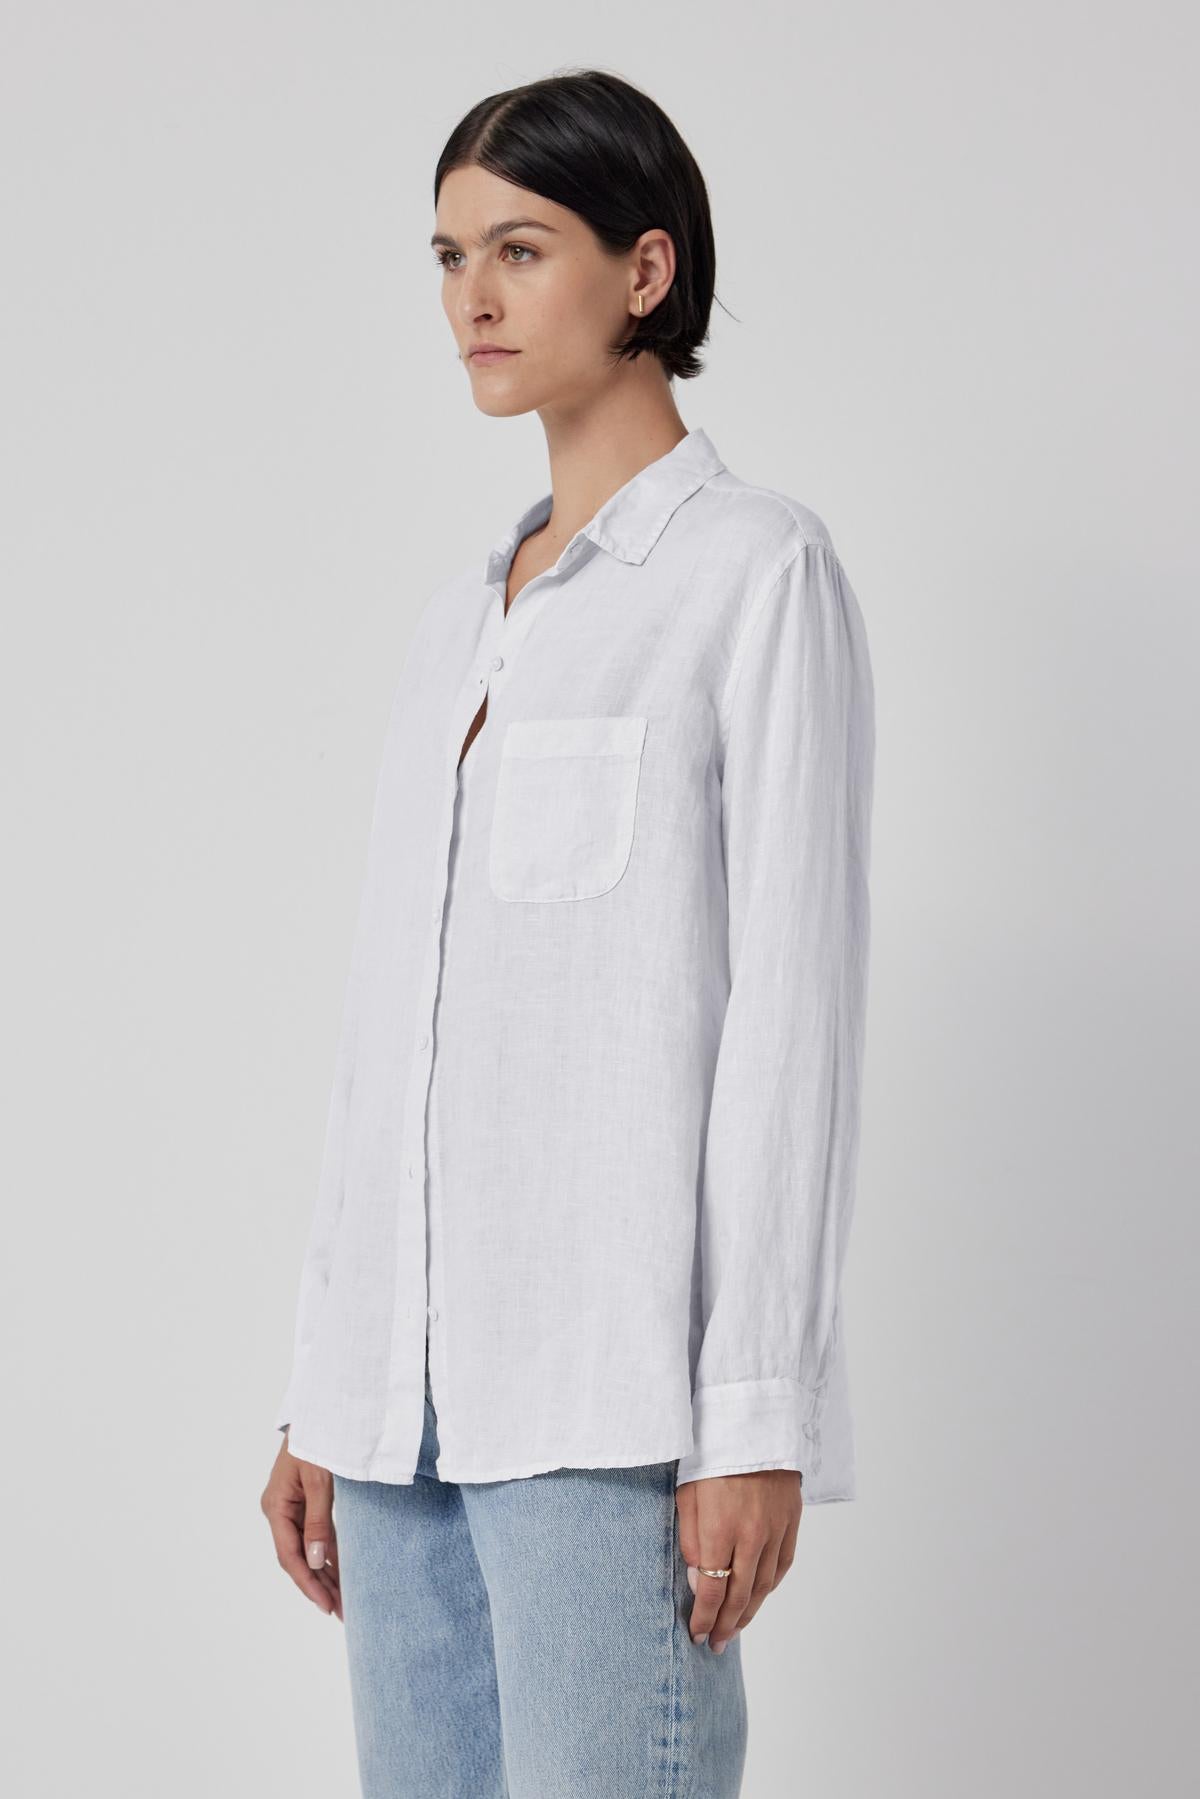 Woman wearing a Velvet by Jenny Graham Mulholland Shirt, a relaxed silhouette, casual white linen button-up shirt with a chest pocket, paired with denim jeans, against a neutral background.-36463551905985